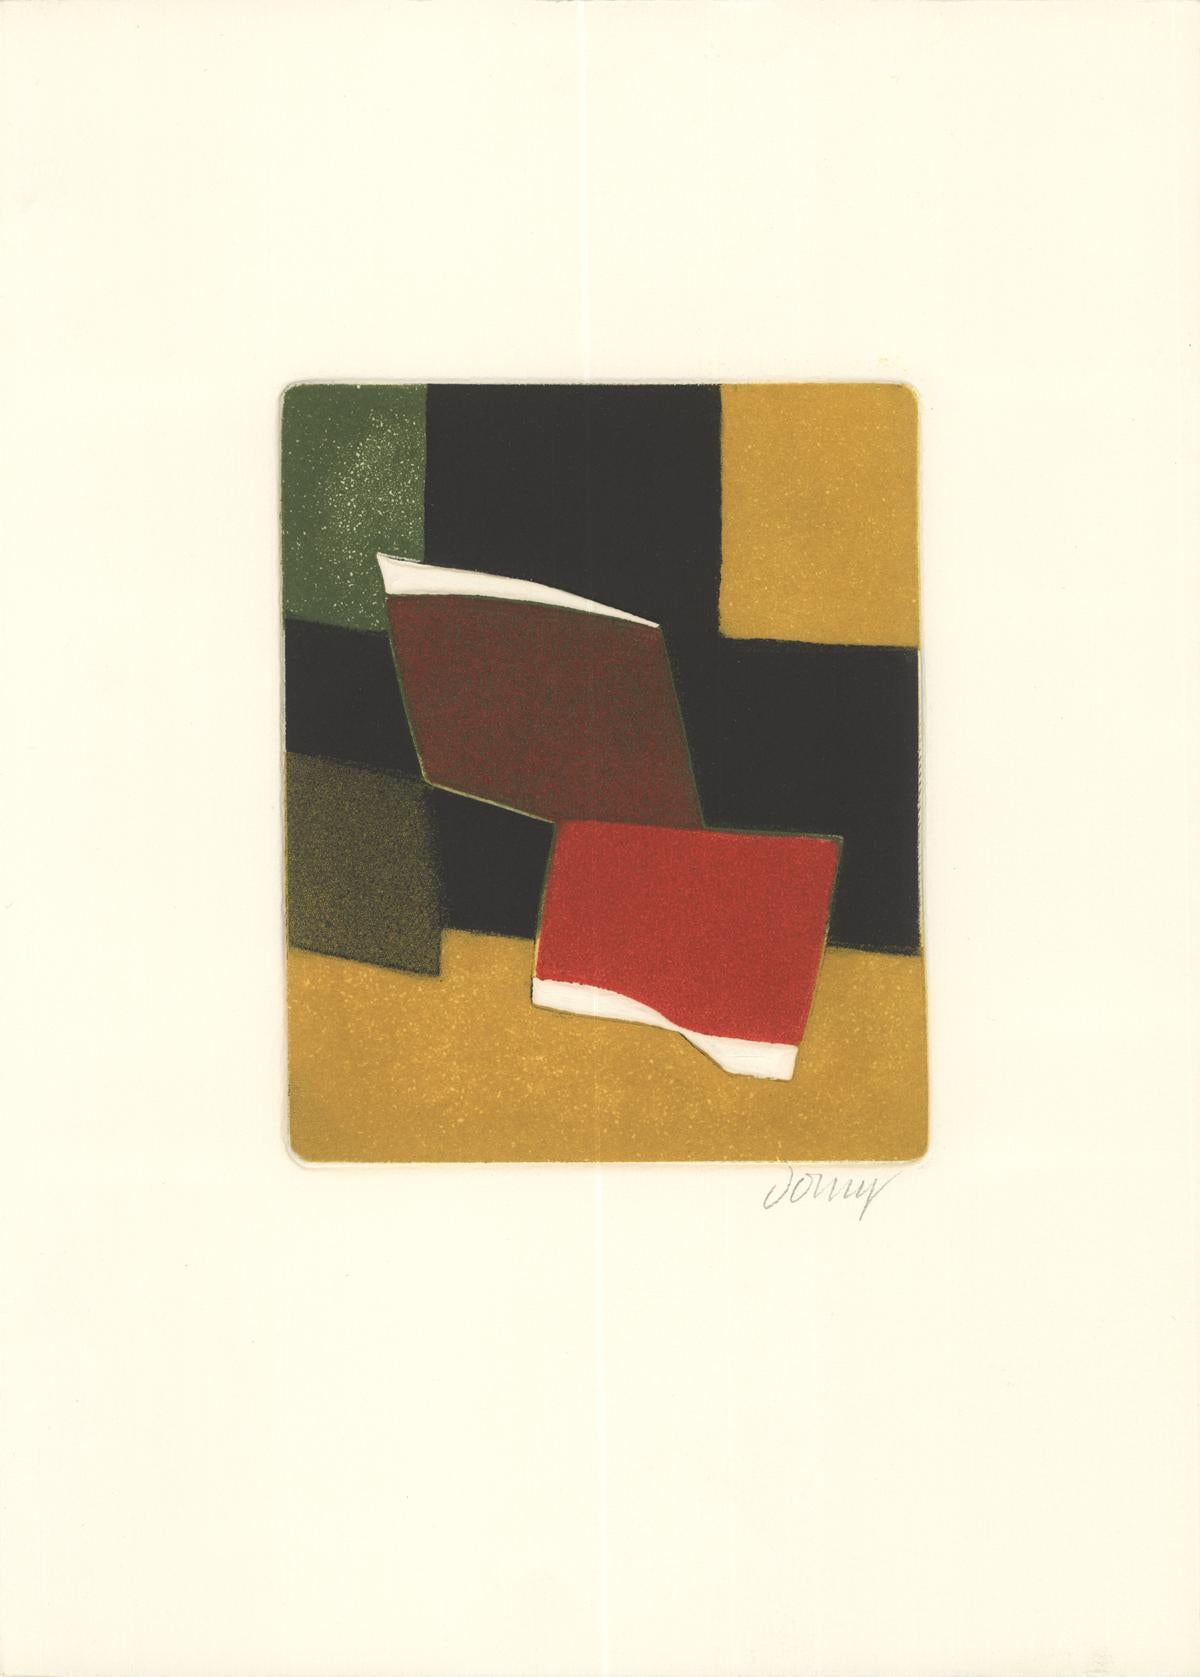 Color Etching from the Pierres D'Ombre portfolio, Signed in pencil by Dorny.  The portfolio consisted of 5 color etchings and was published by La Mata Editeurs, Paris, in 1974.
